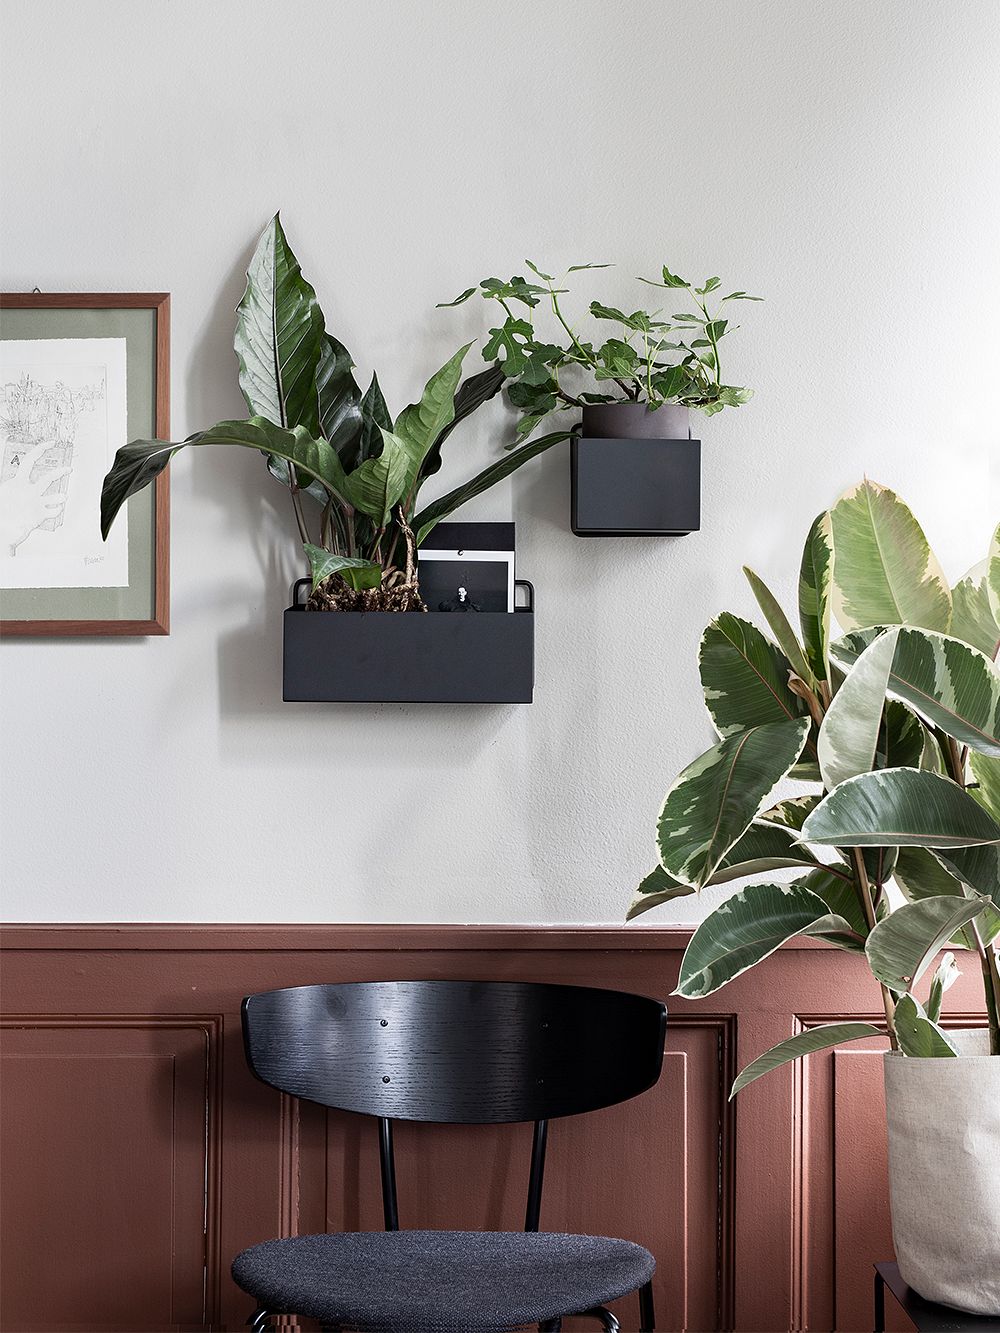 Ferm Living's Wall Box planters attached to a wall.